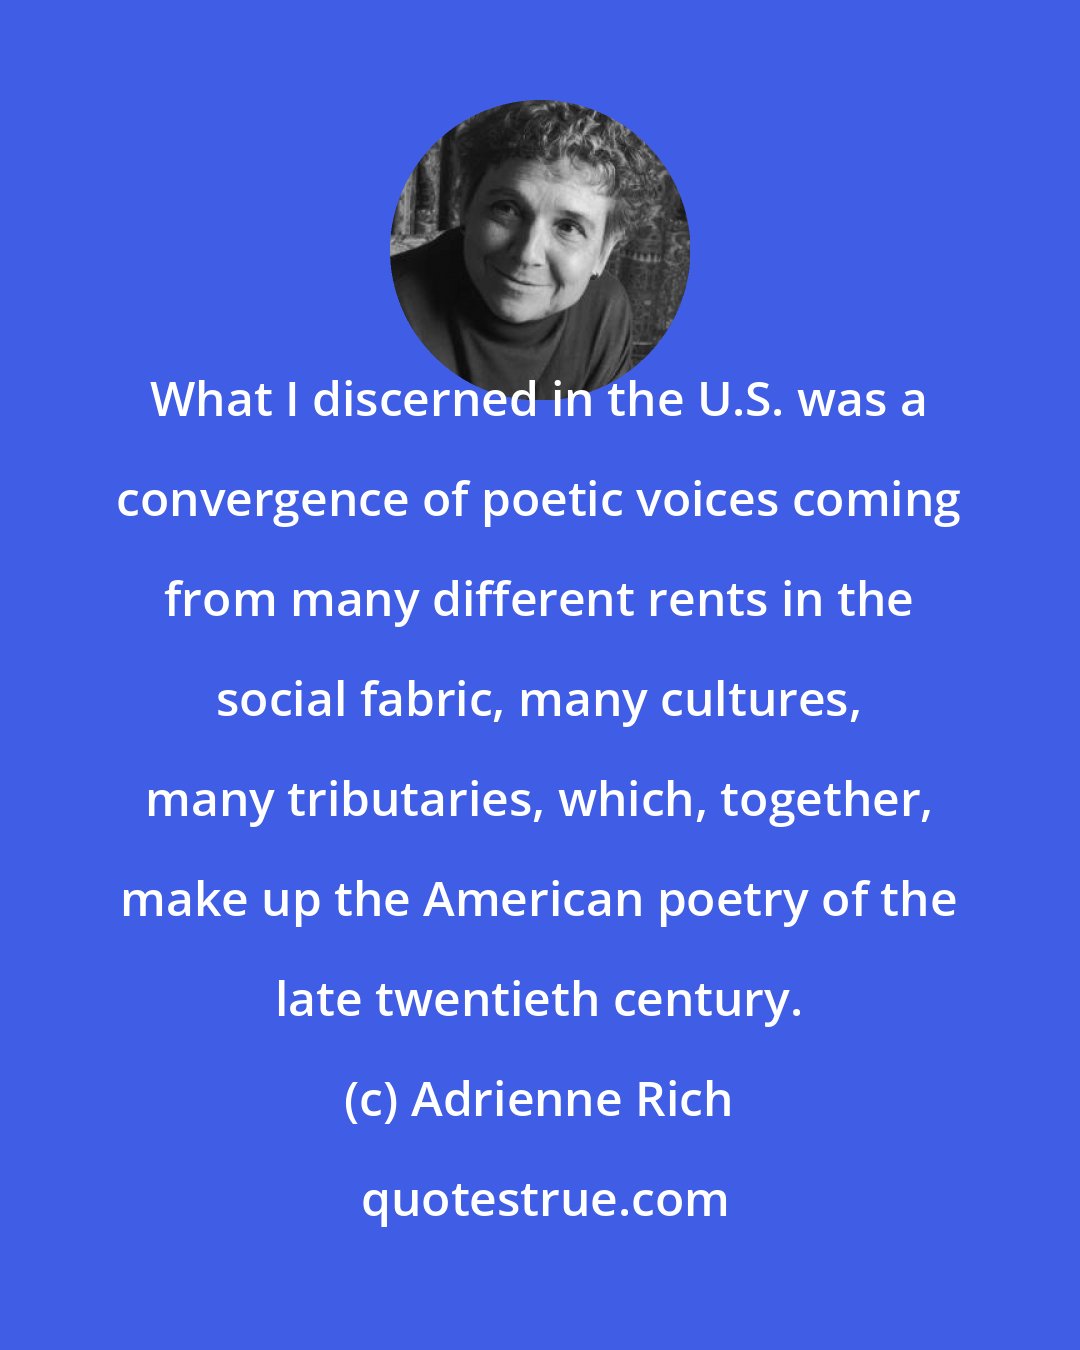 Adrienne Rich: What I discerned in the U.S. was a convergence of poetic voices coming from many different rents in the social fabric, many cultures, many tributaries, which, together, make up the American poetry of the late twentieth century.